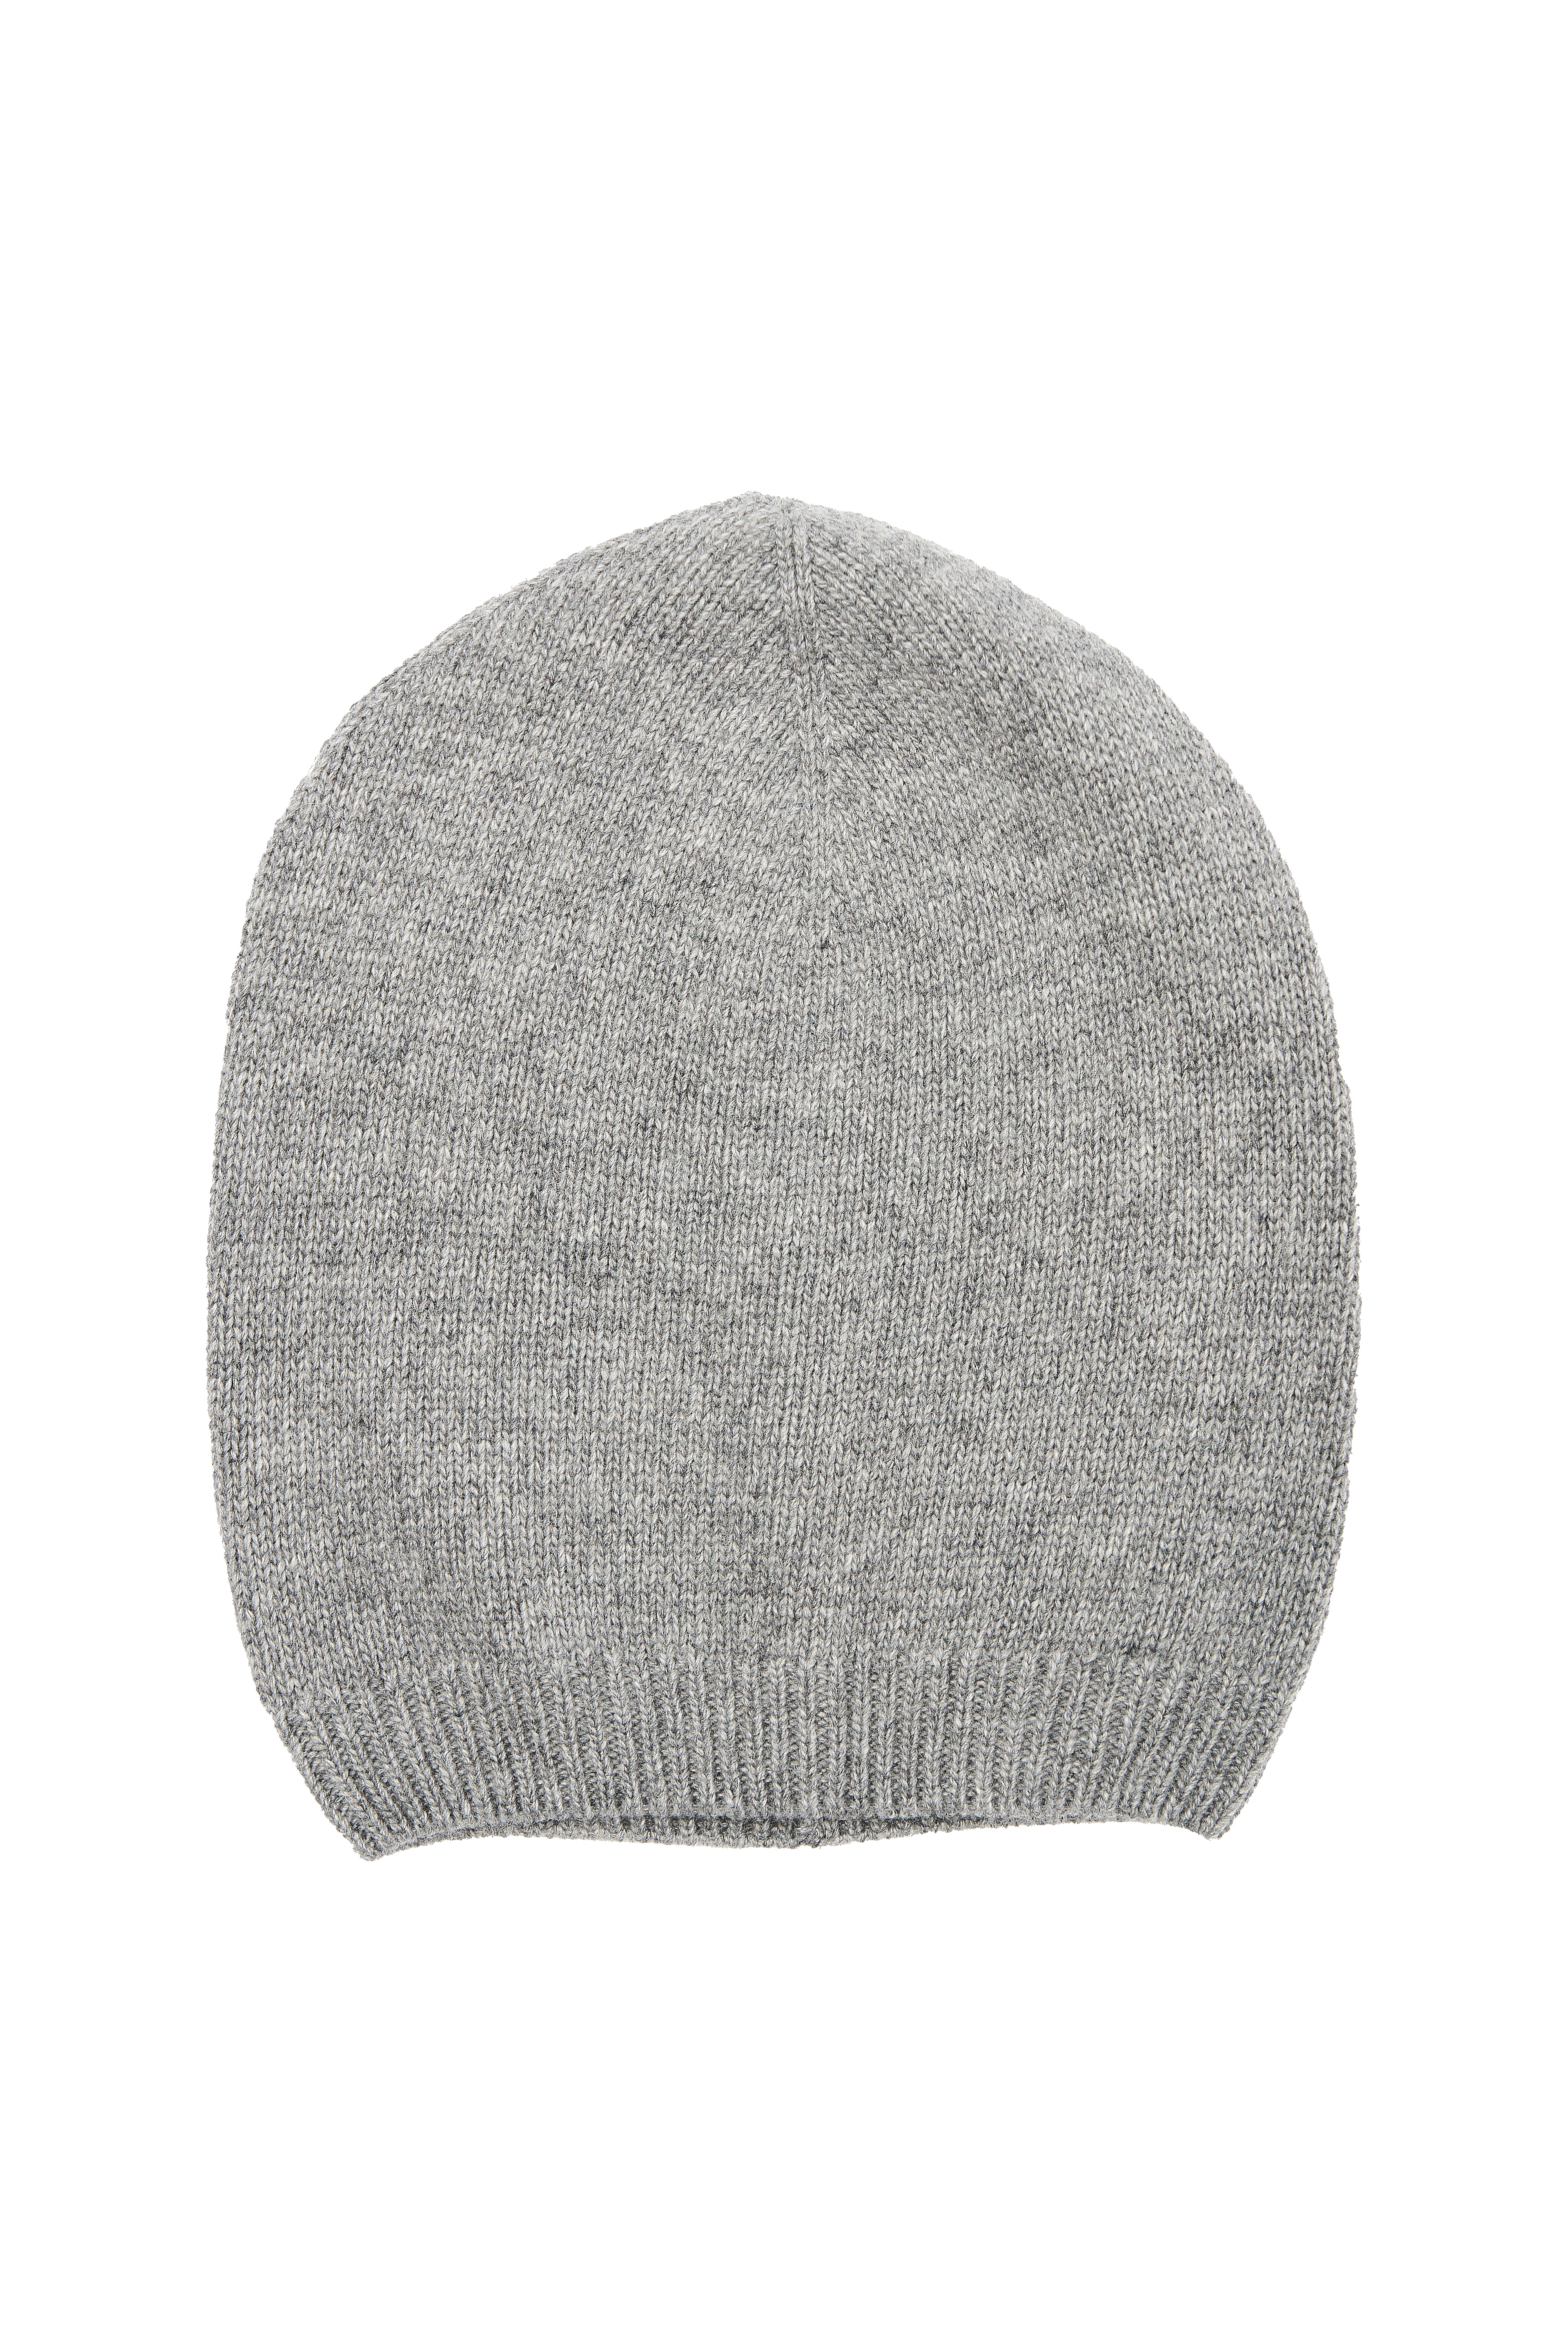 KNITTED GREY CAP WITH CASHMERE